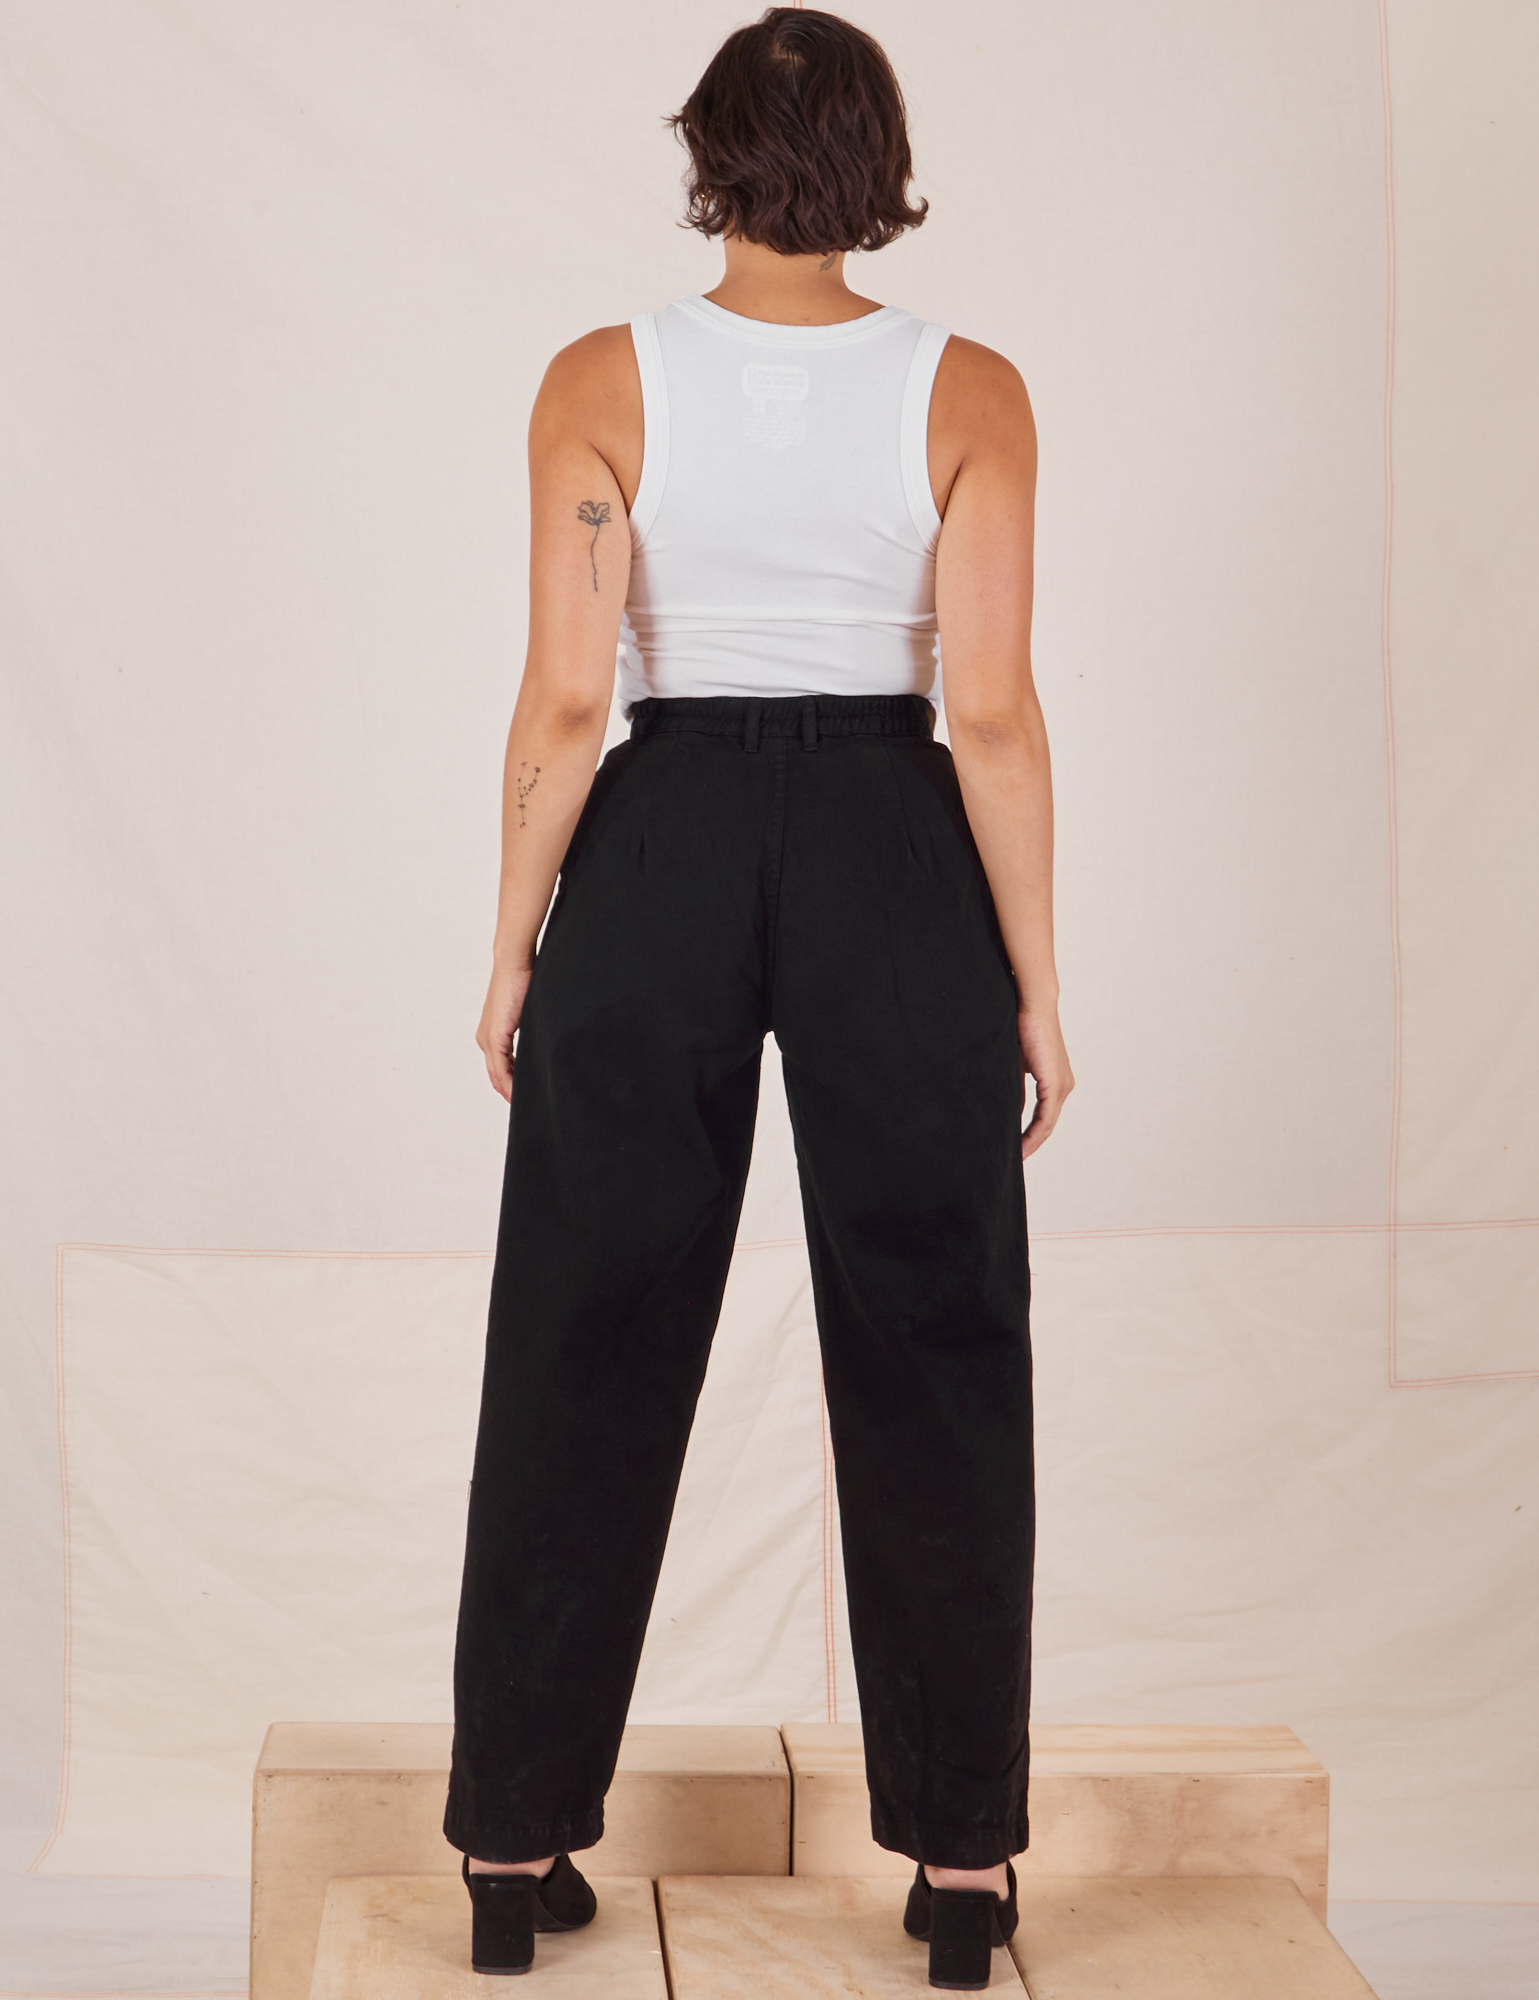 Back view of Heavyweight Trousers in Basic Black and Cropped Tank Top in vintage tee off-white worn by Tiara